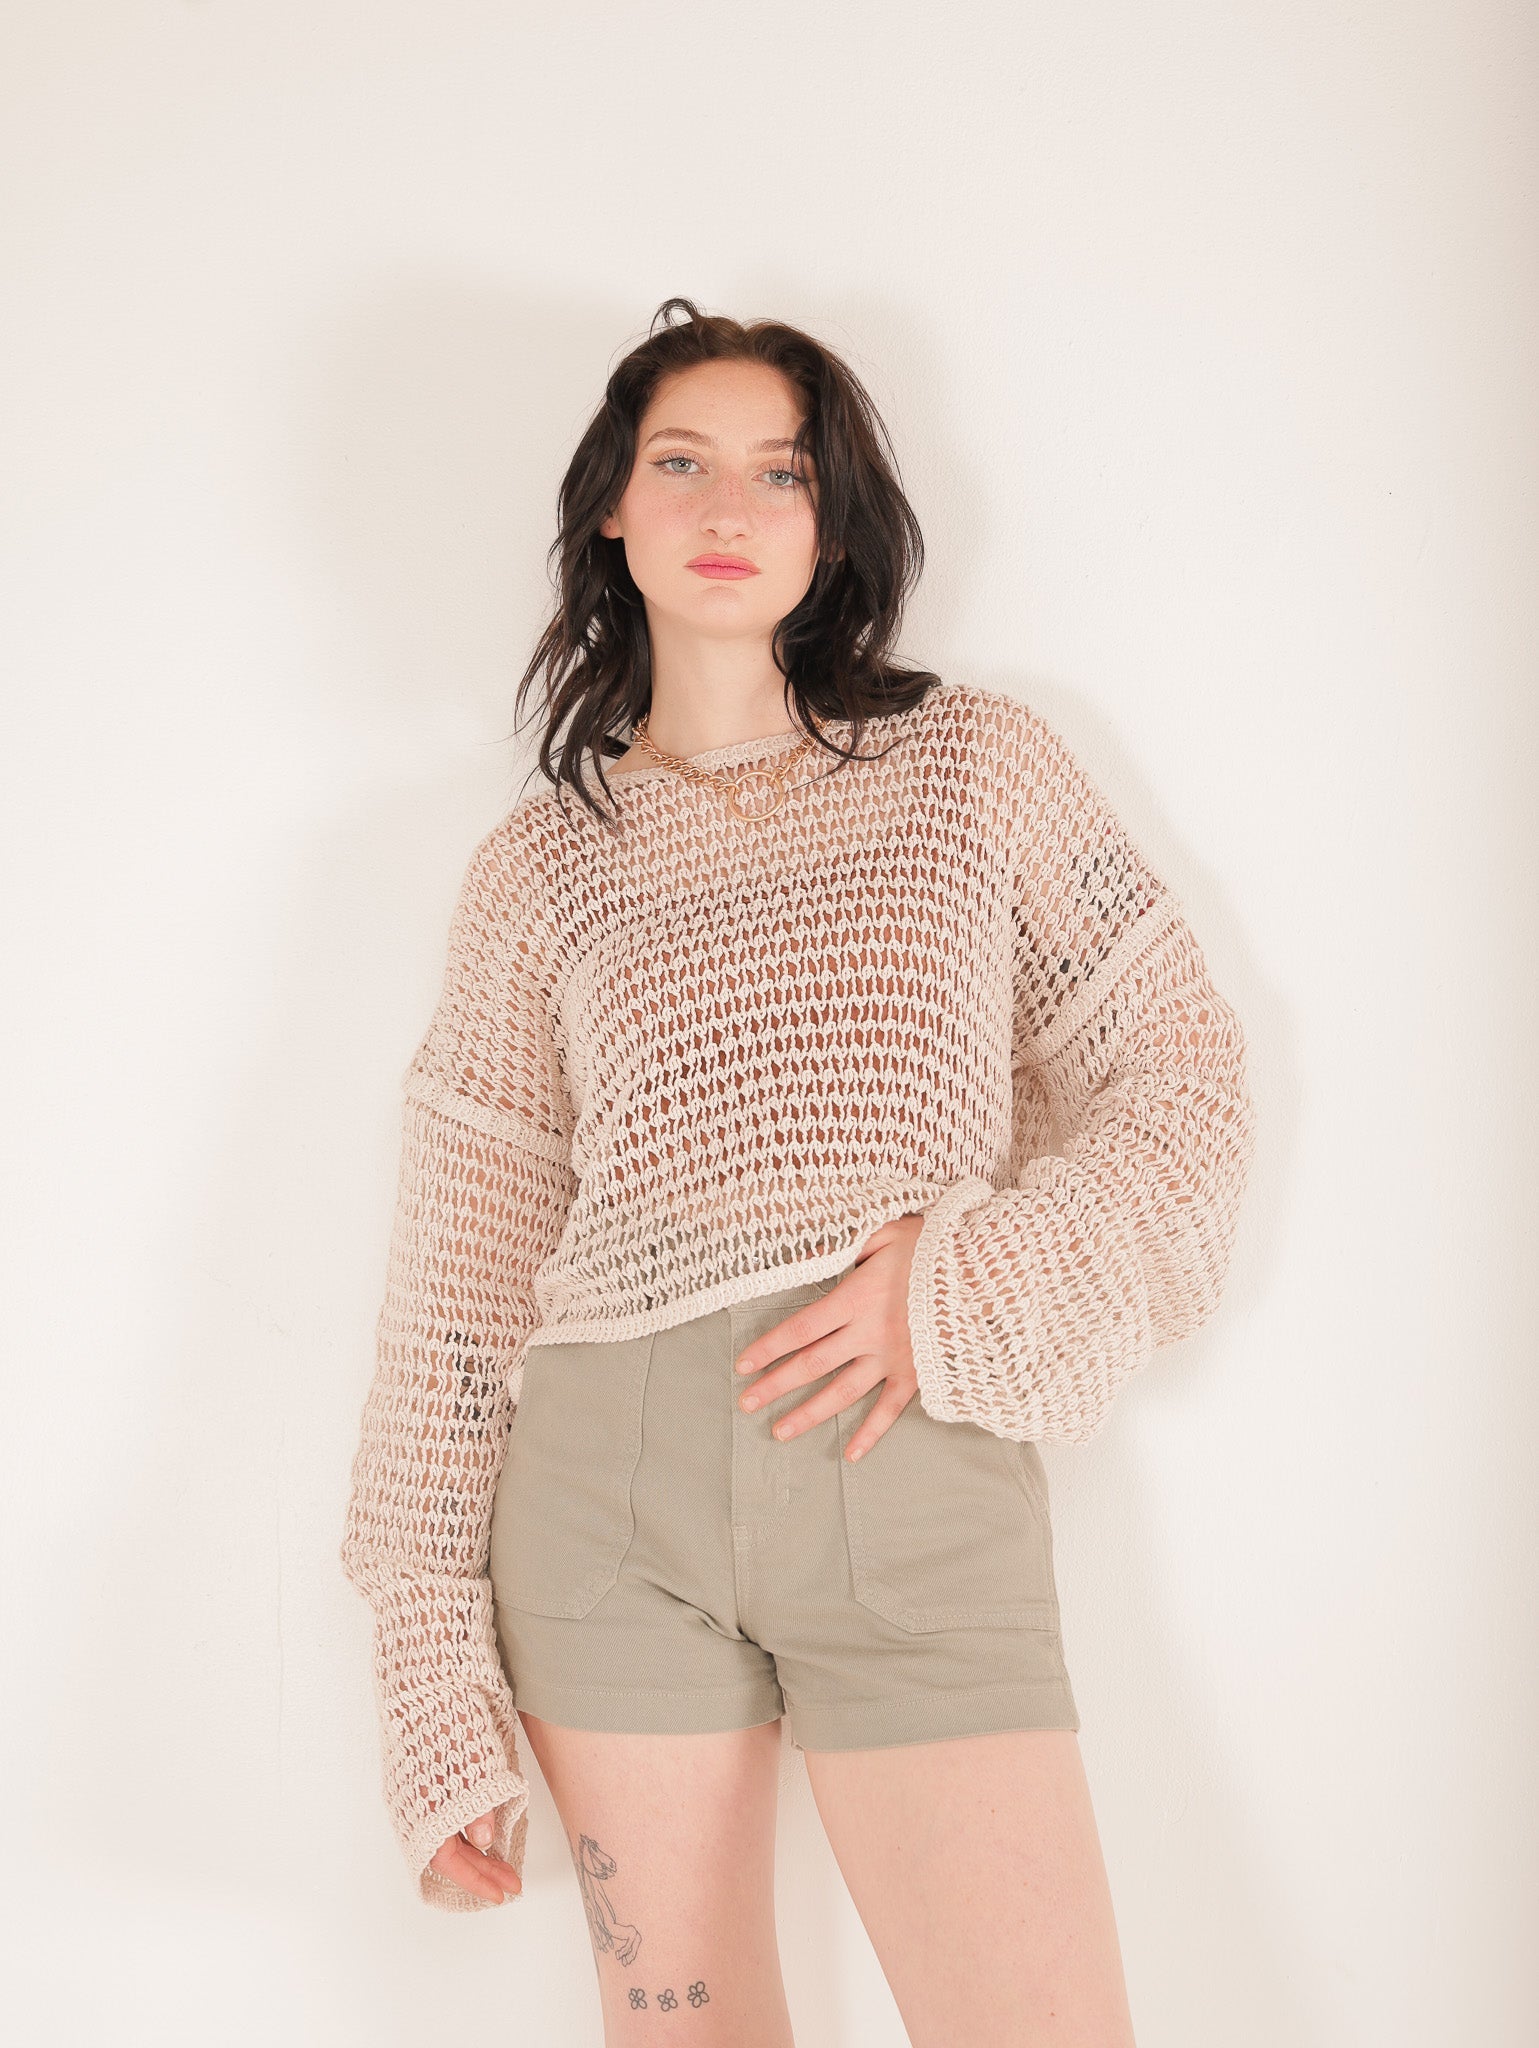 Molly Green - Dixie Knit Sweater - Sweaters_Cardigans